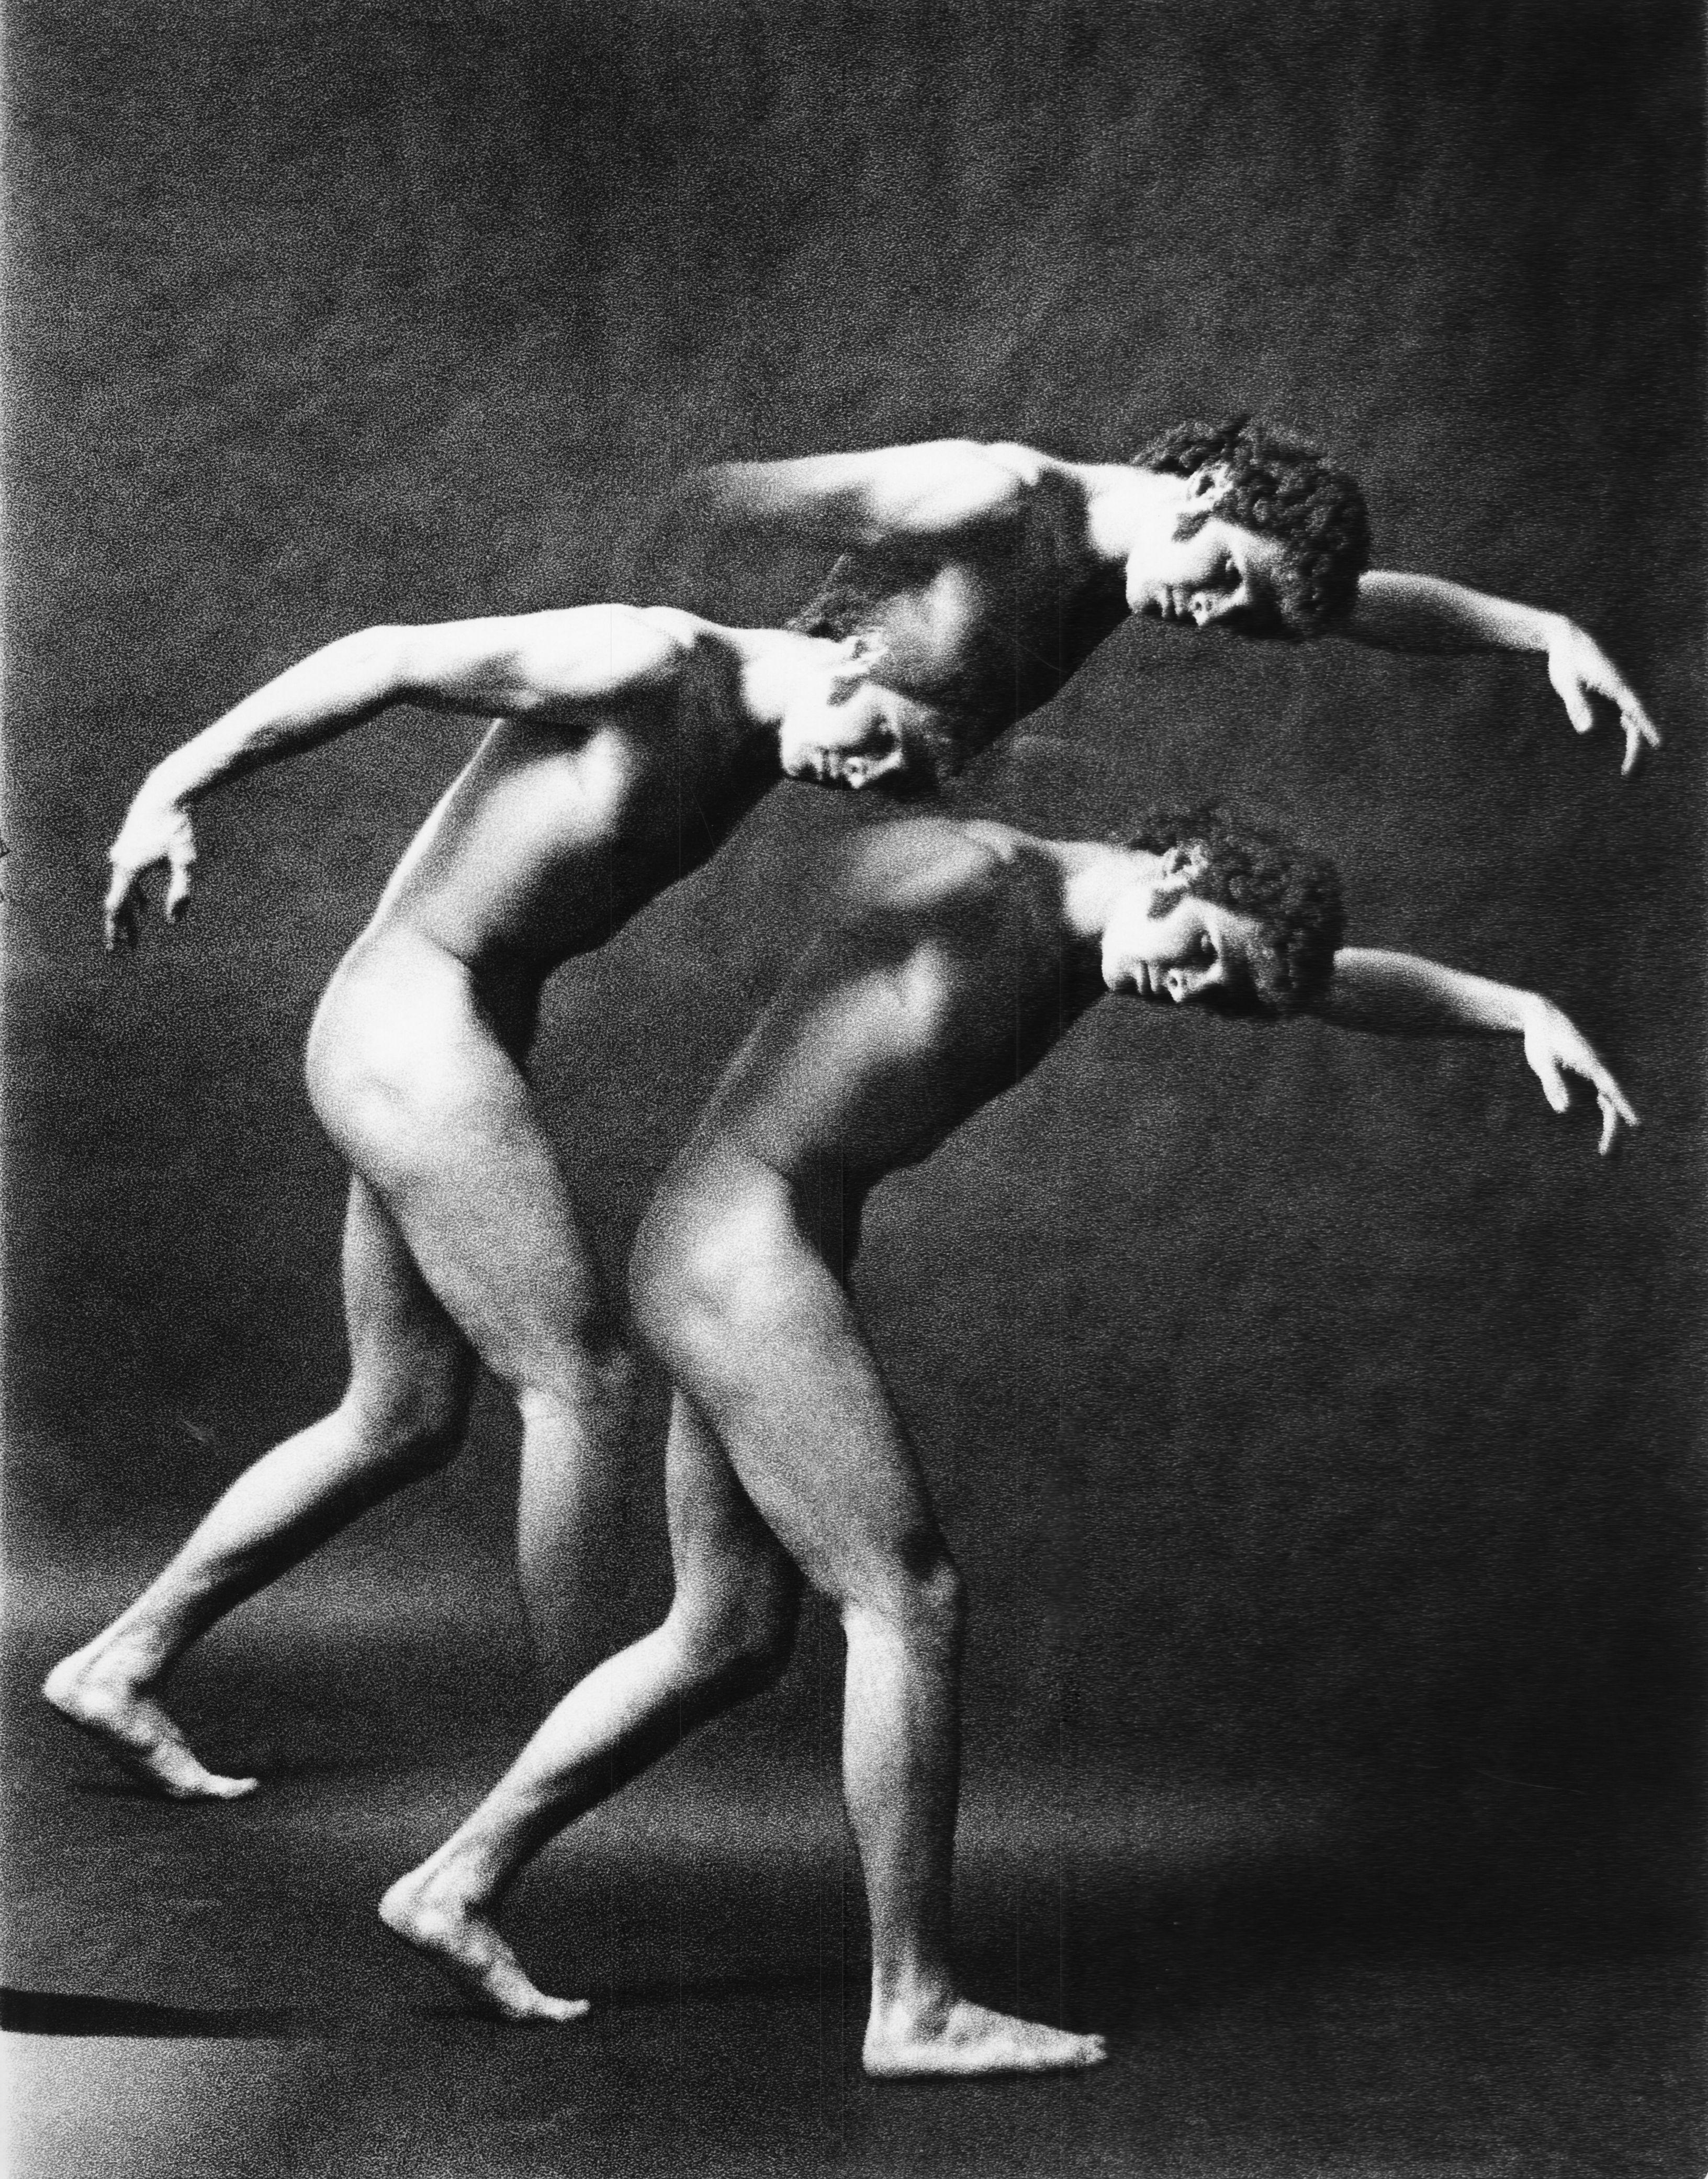 Jack Mitchell Black and White Photograph - Dancer Leland Schwantes multiple exposure nude for After Dark  magazine